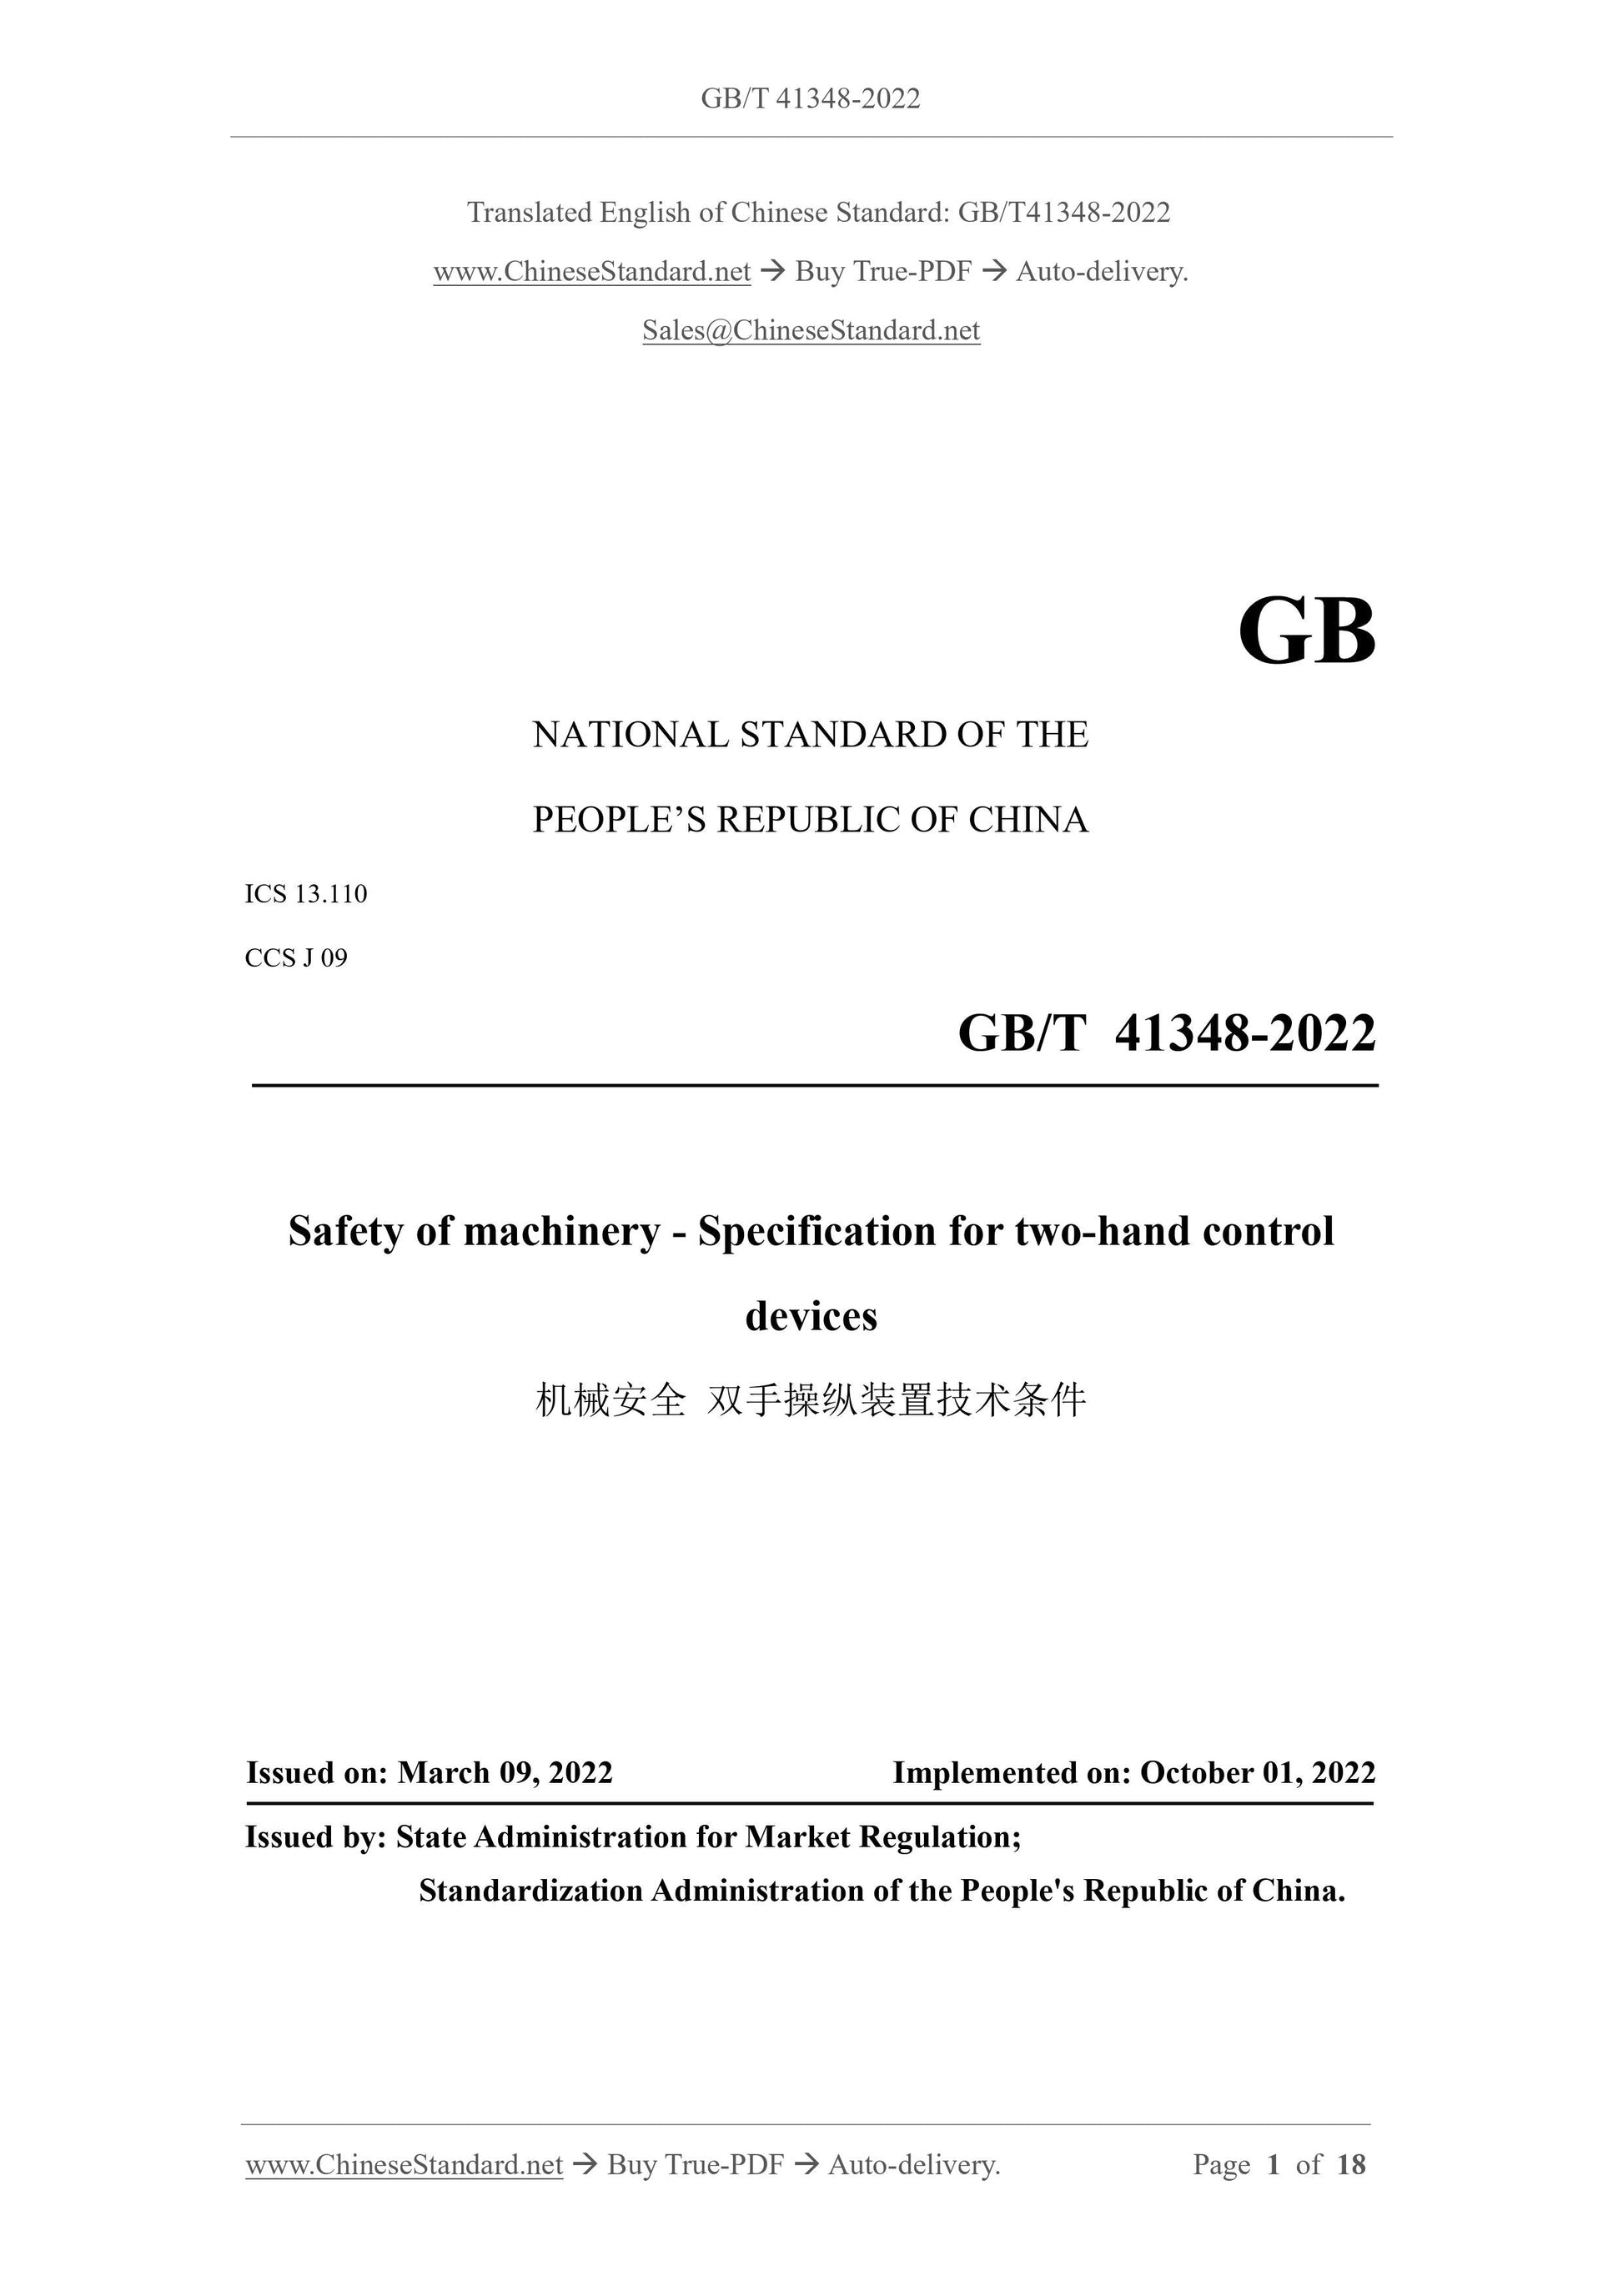 GB/T 41348-2022 Page 1